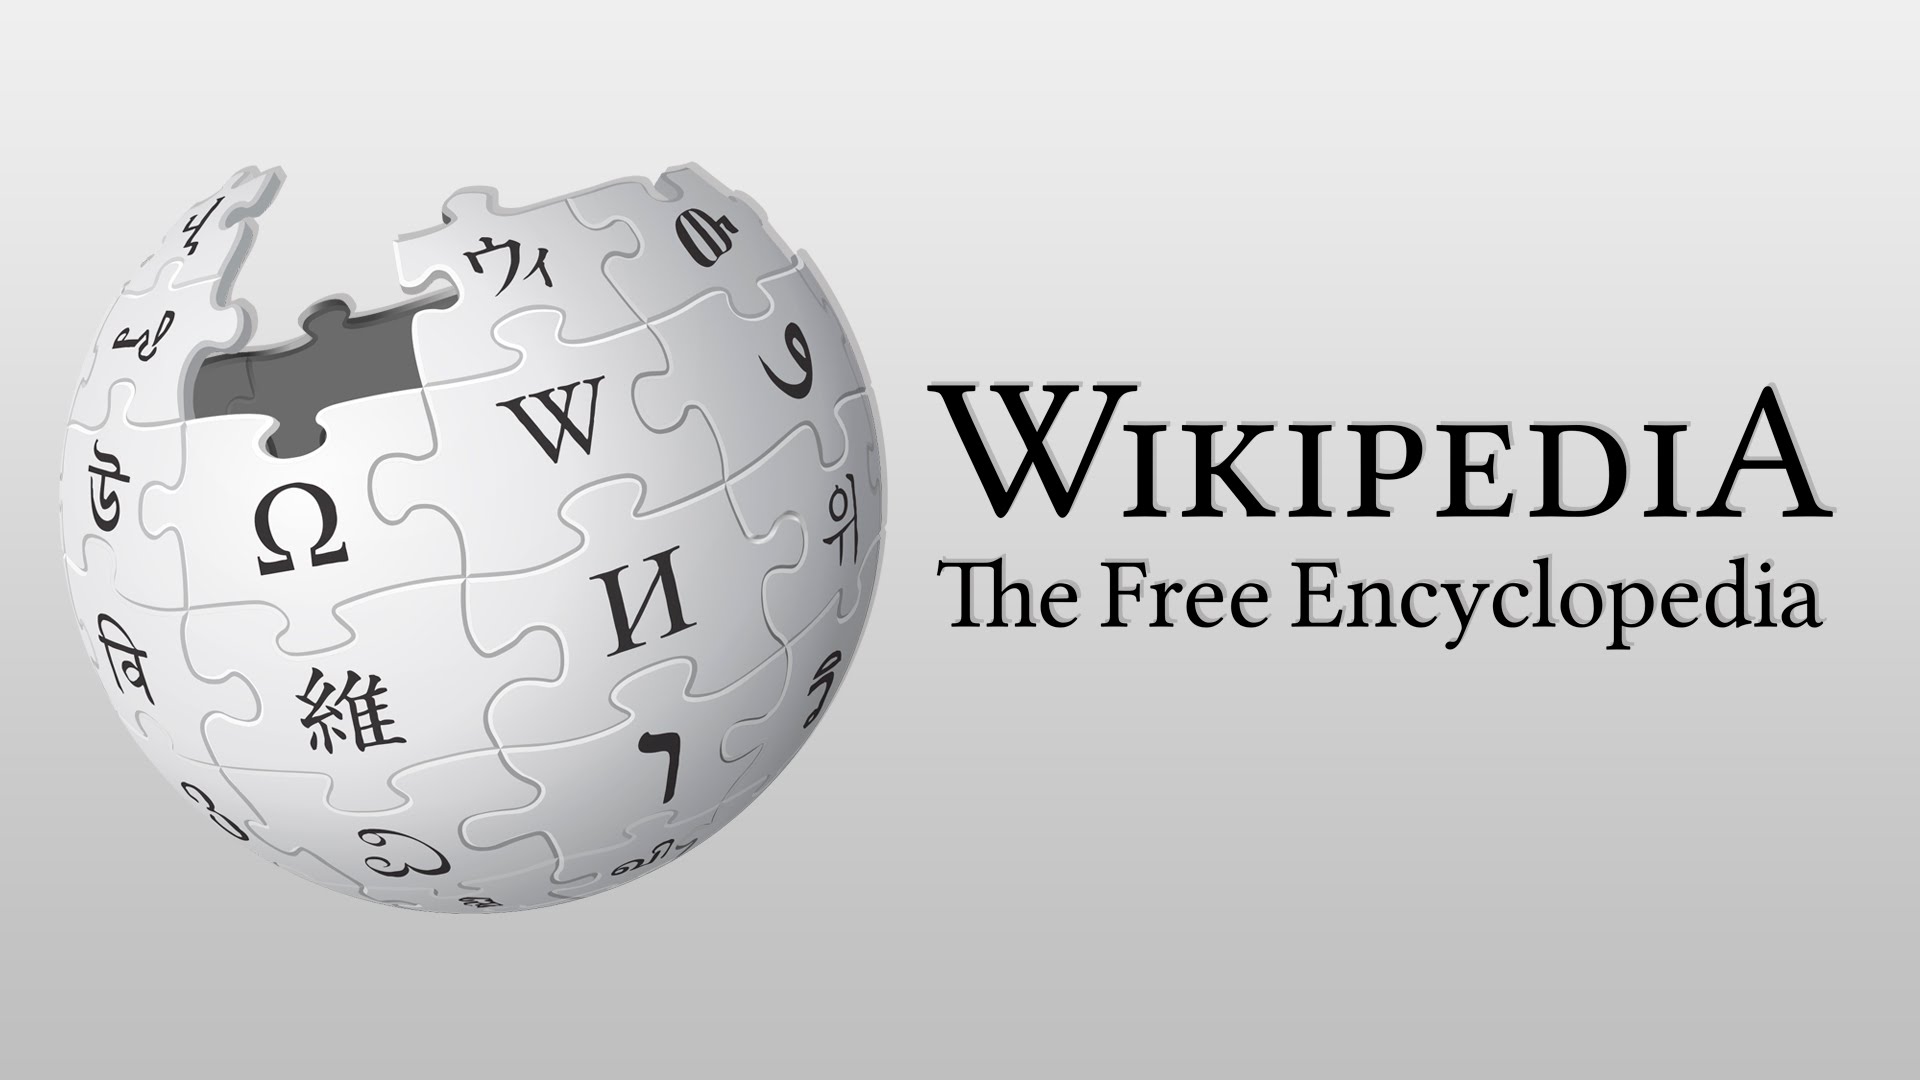 Wikipedia gets a new user interface to mark its 22nd anniversary